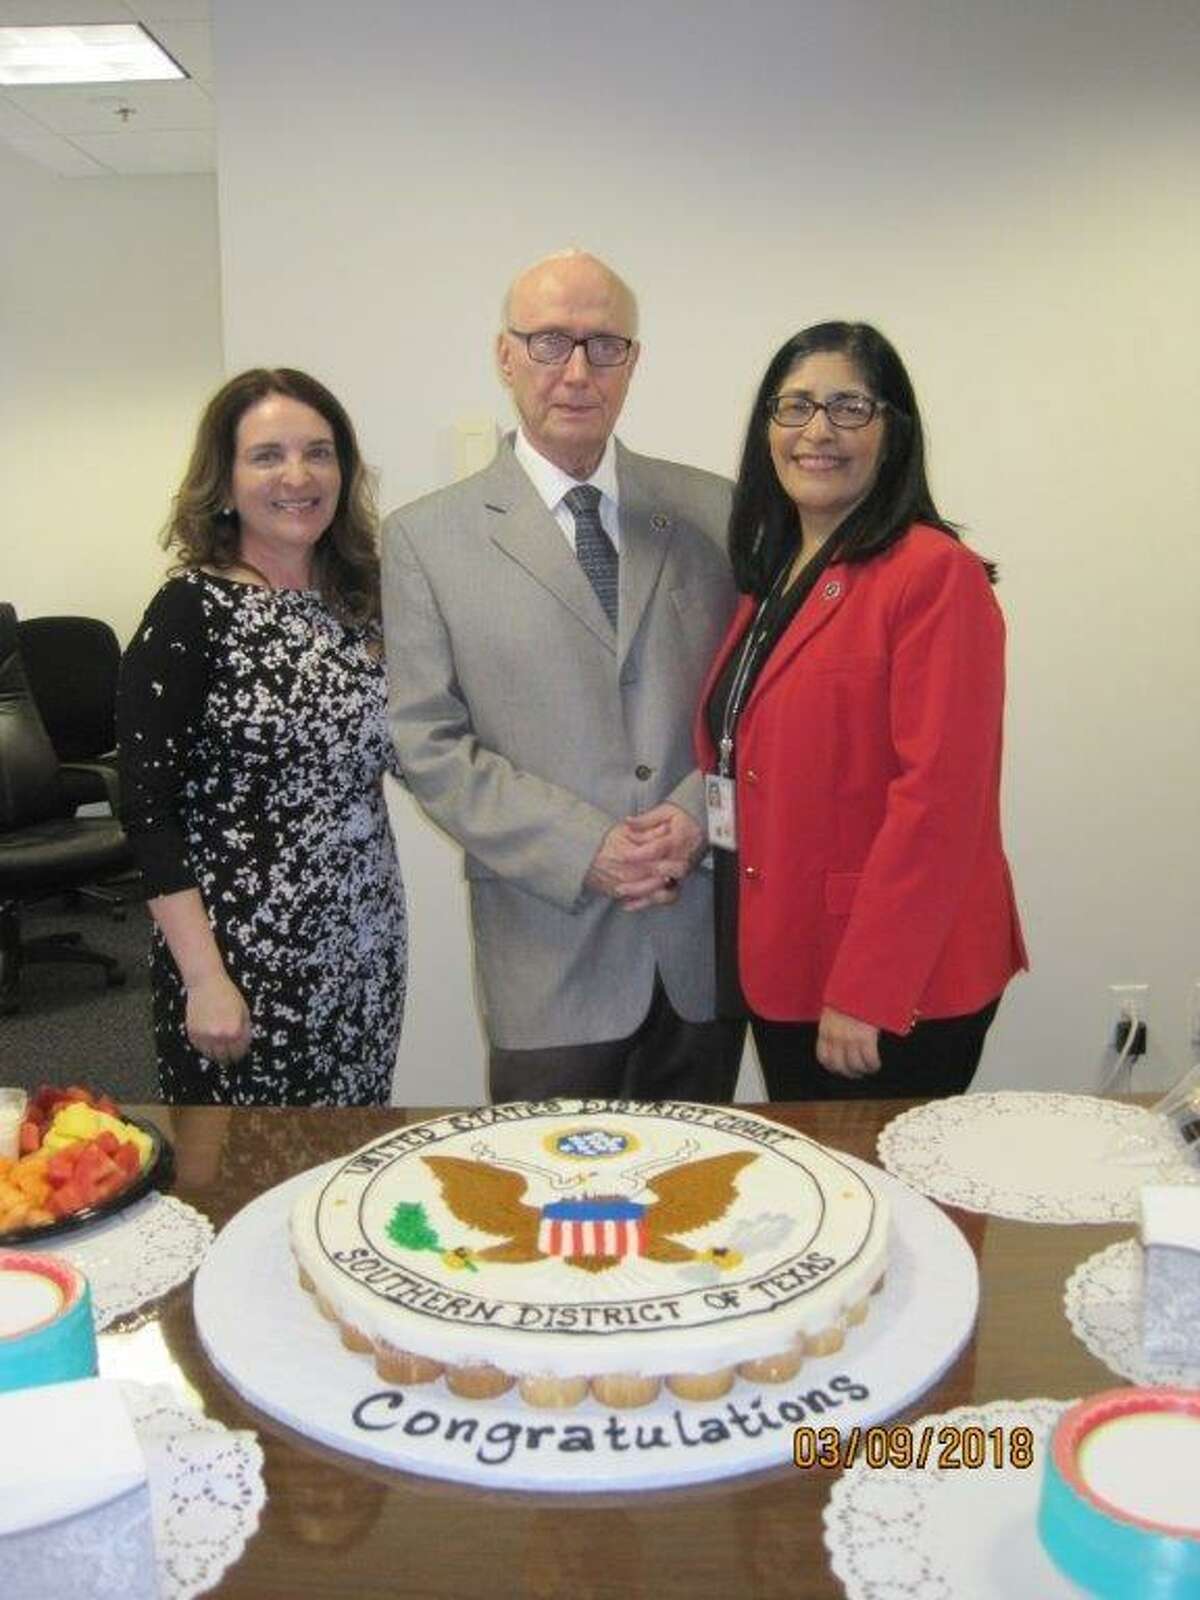 U.S. district judges Marina Garcia Marmolejo, left, and Diana Saldaña pose for a photo with Senior U.S. District Court Judge George P. Kazen at his retirement party on Friday.